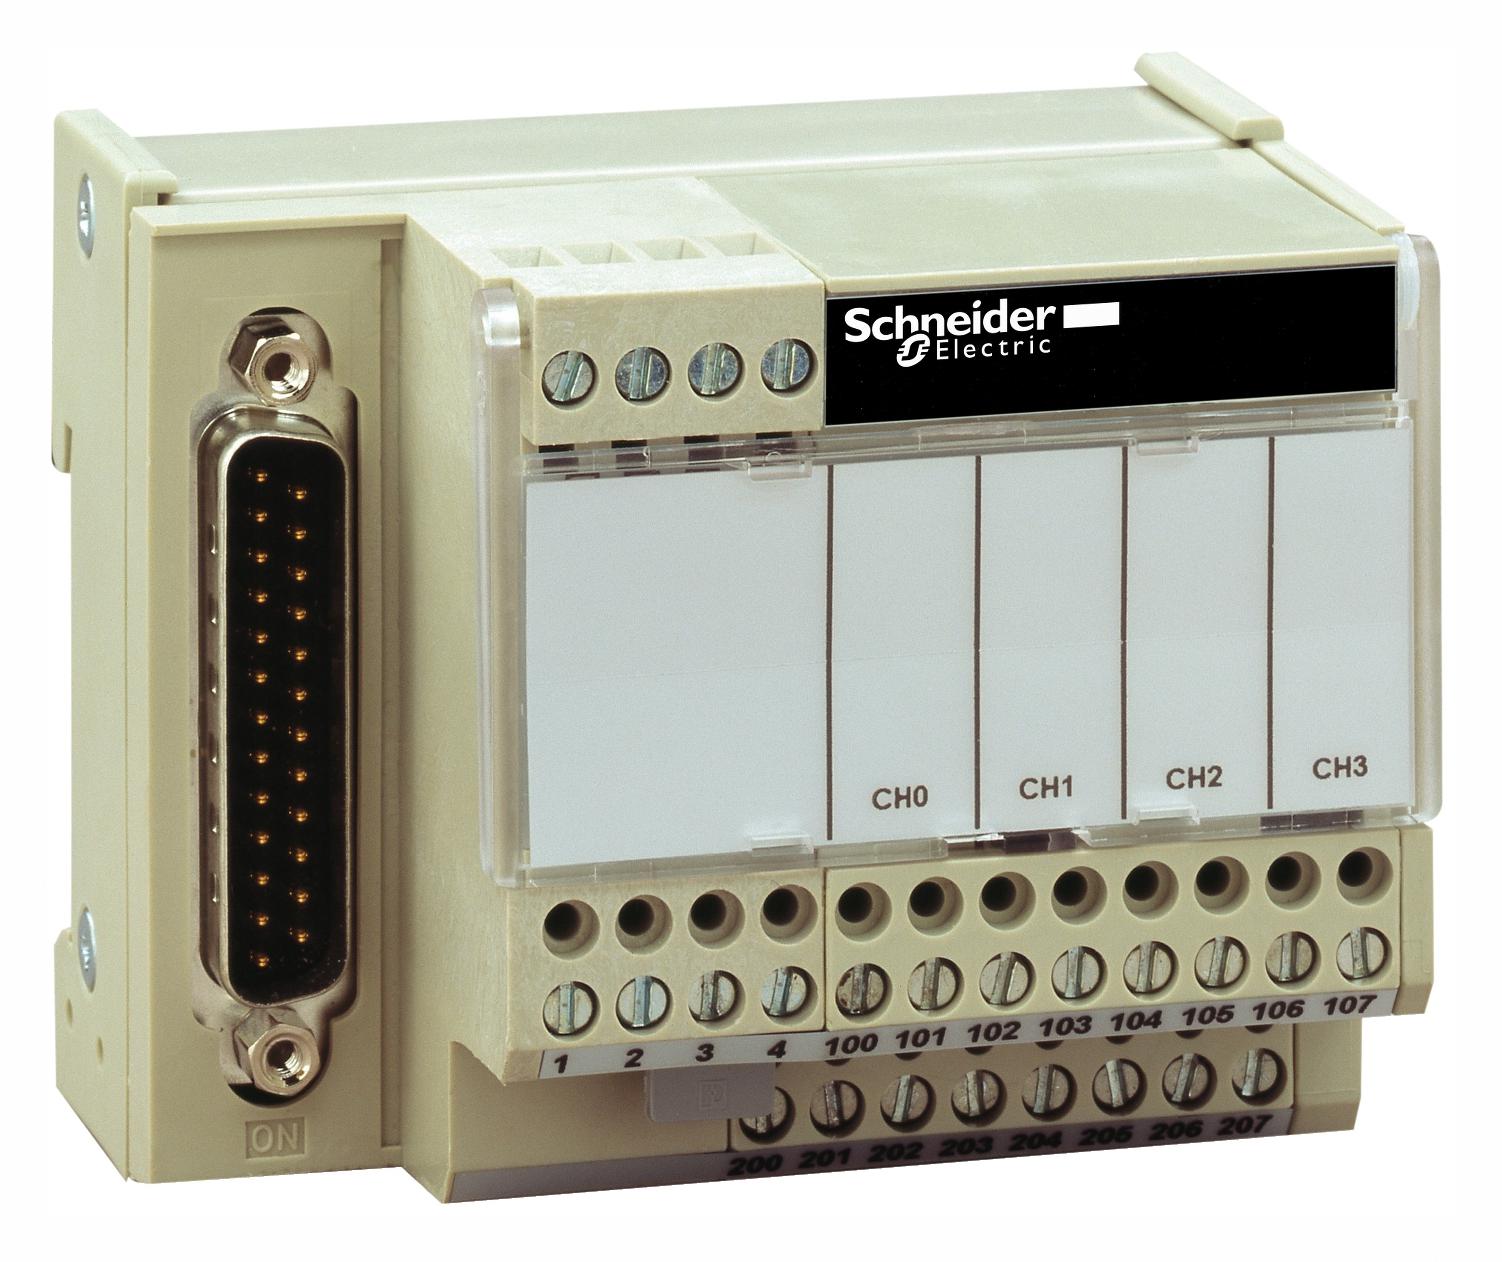 ABE7CPA21 CONNECTION SUB BASE, 4 O/P CHANNEL SCHNEIDER ELECTRIC